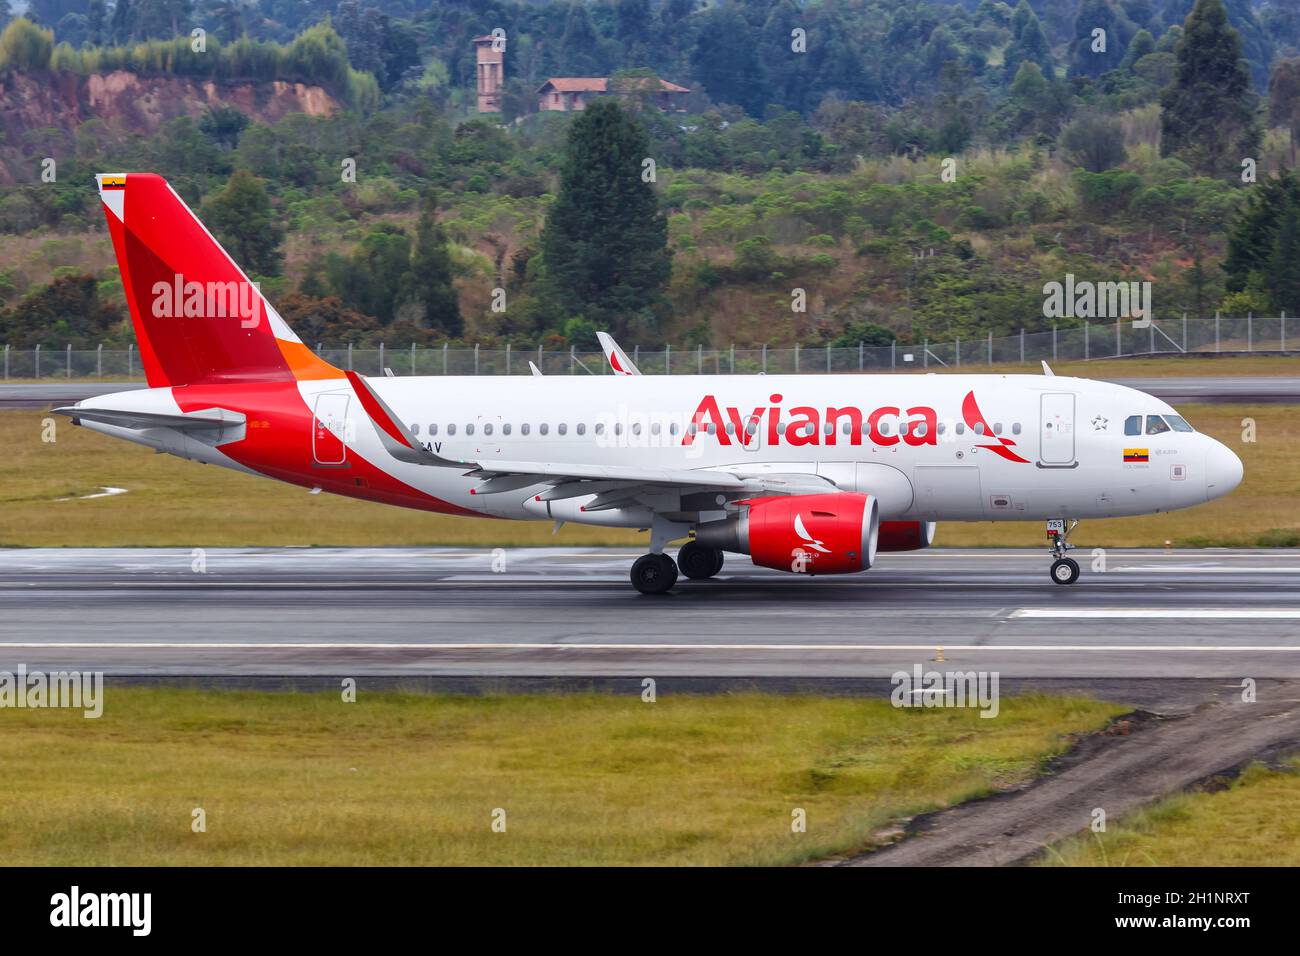 Medellin, Colombia - January 25, 2019: Avianca Airbus A319 airplane at Medellin Rionegro Airport (MDE) in Colombia. Airbus is a European aircraft manu Stock Photo